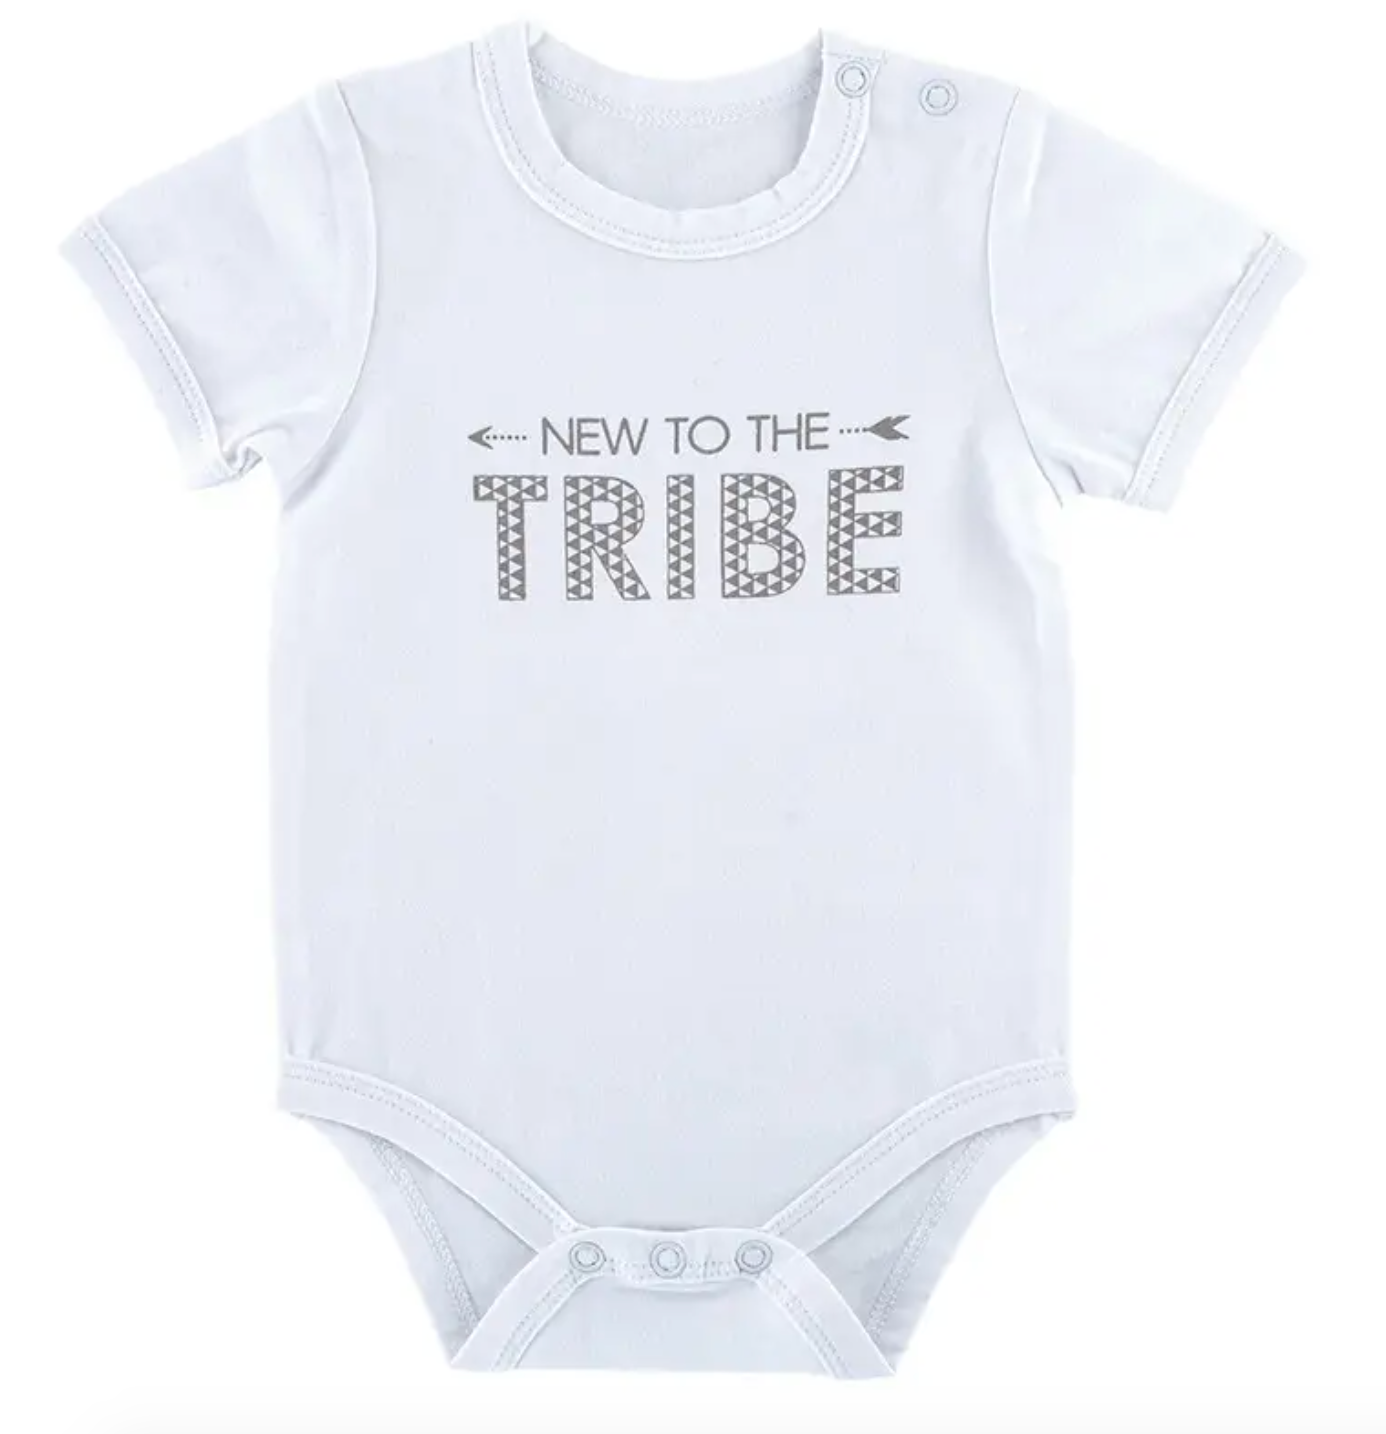 New To the Tribe Shirt